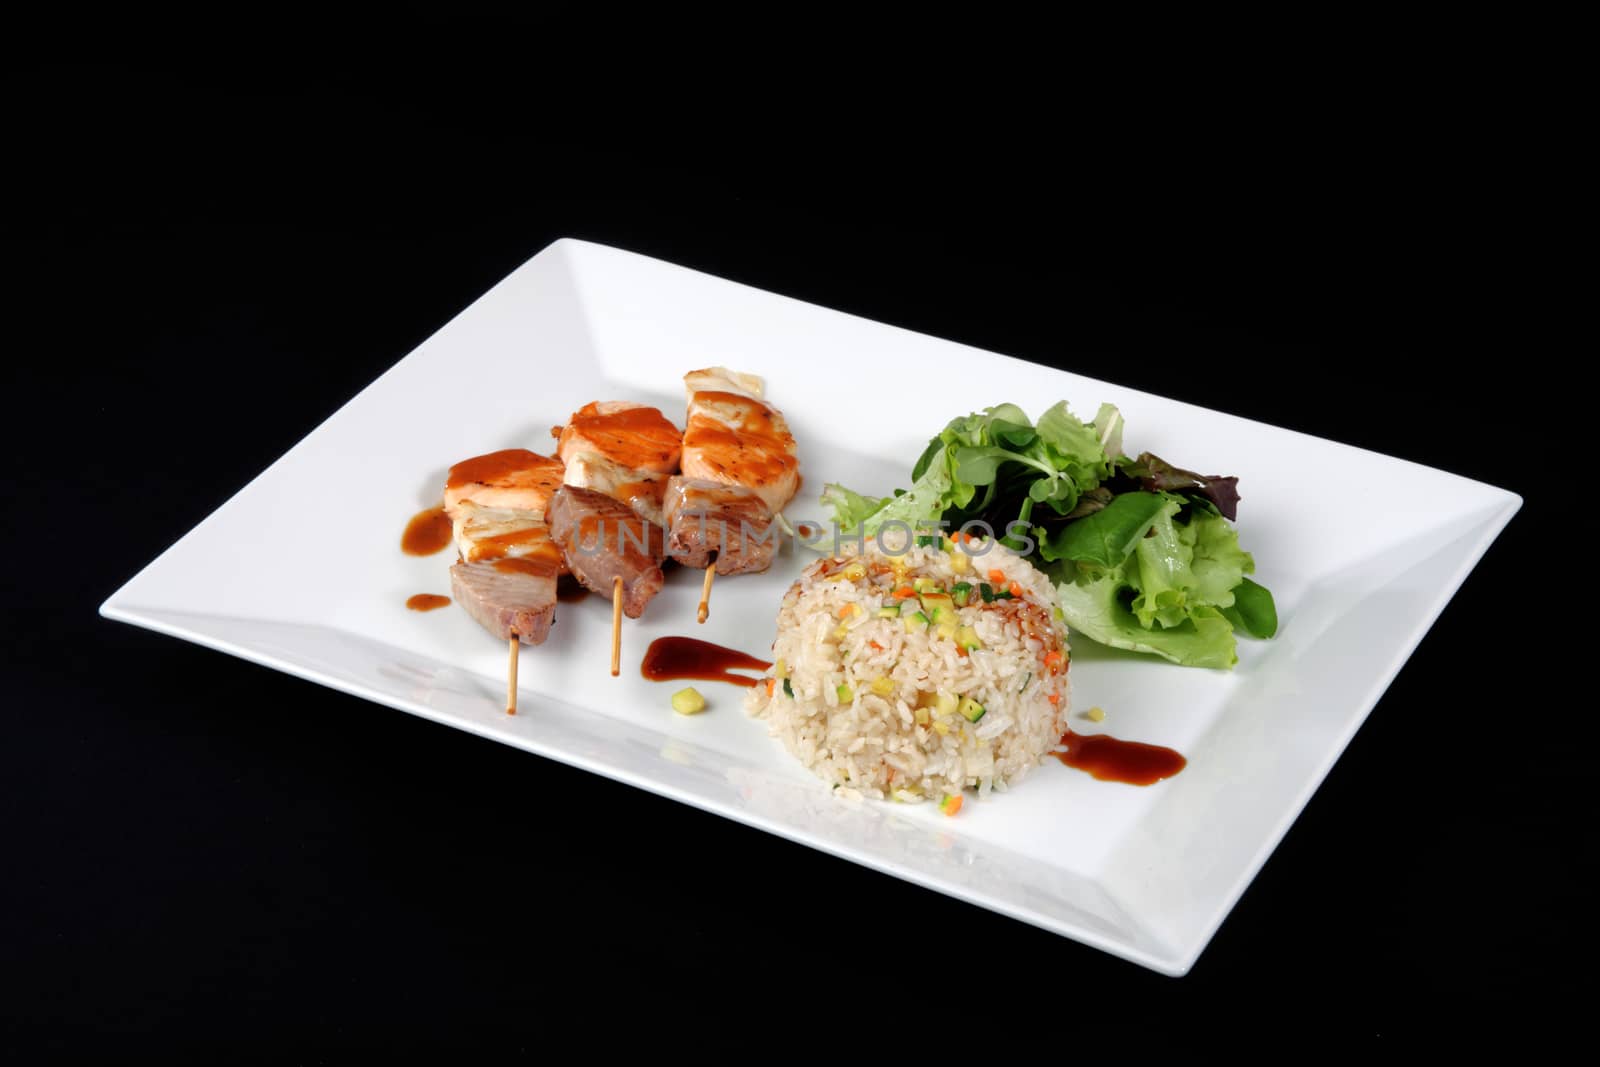 menu of kebabs with rice and vegetables in white dish, on black background